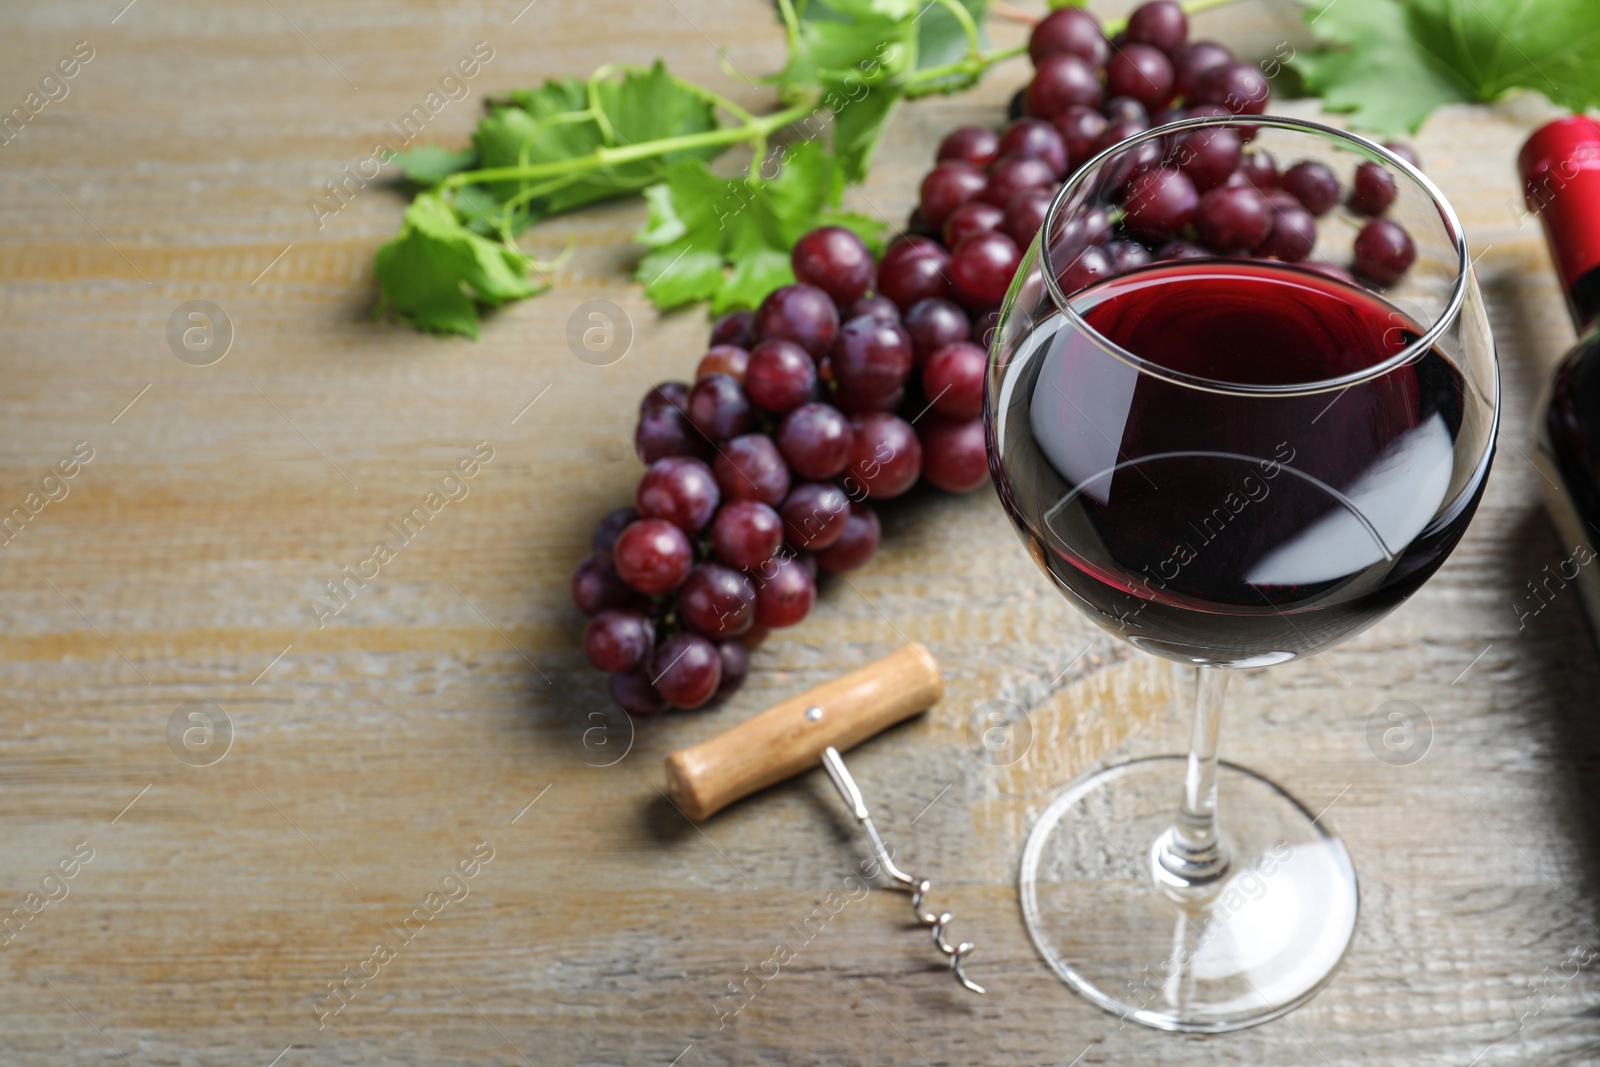 Photo of Fresh ripe juicy grapes and glass of wine on wooden table